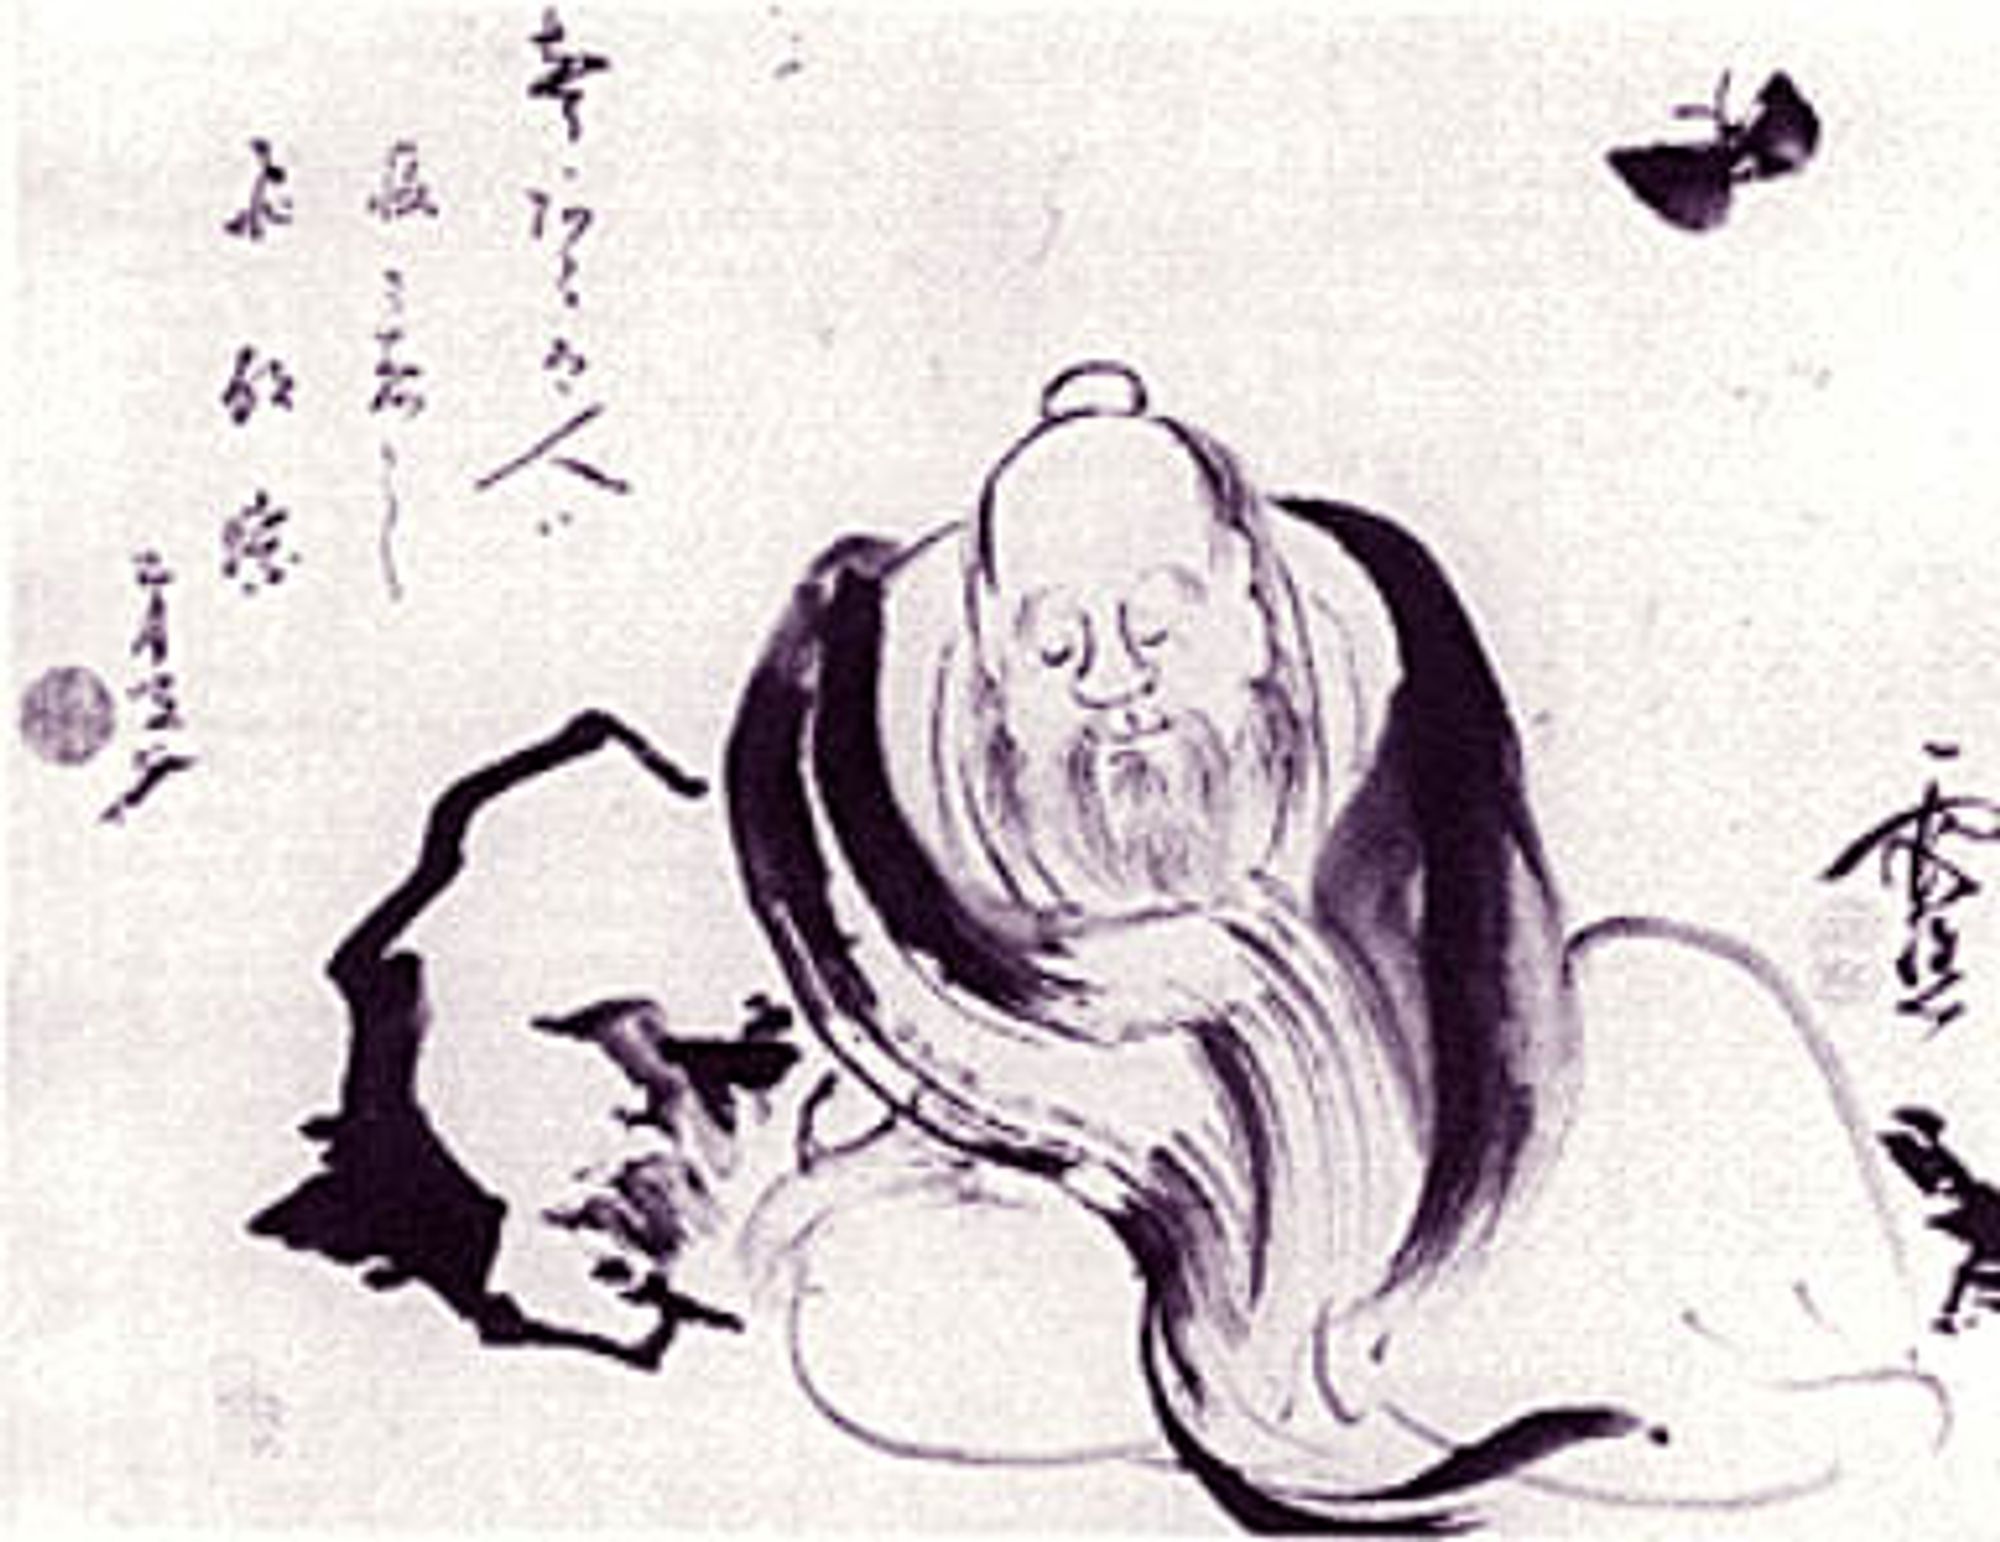 Butterfly Dream, by Zhuangzi, Chinese philosopher of the 4th century BC